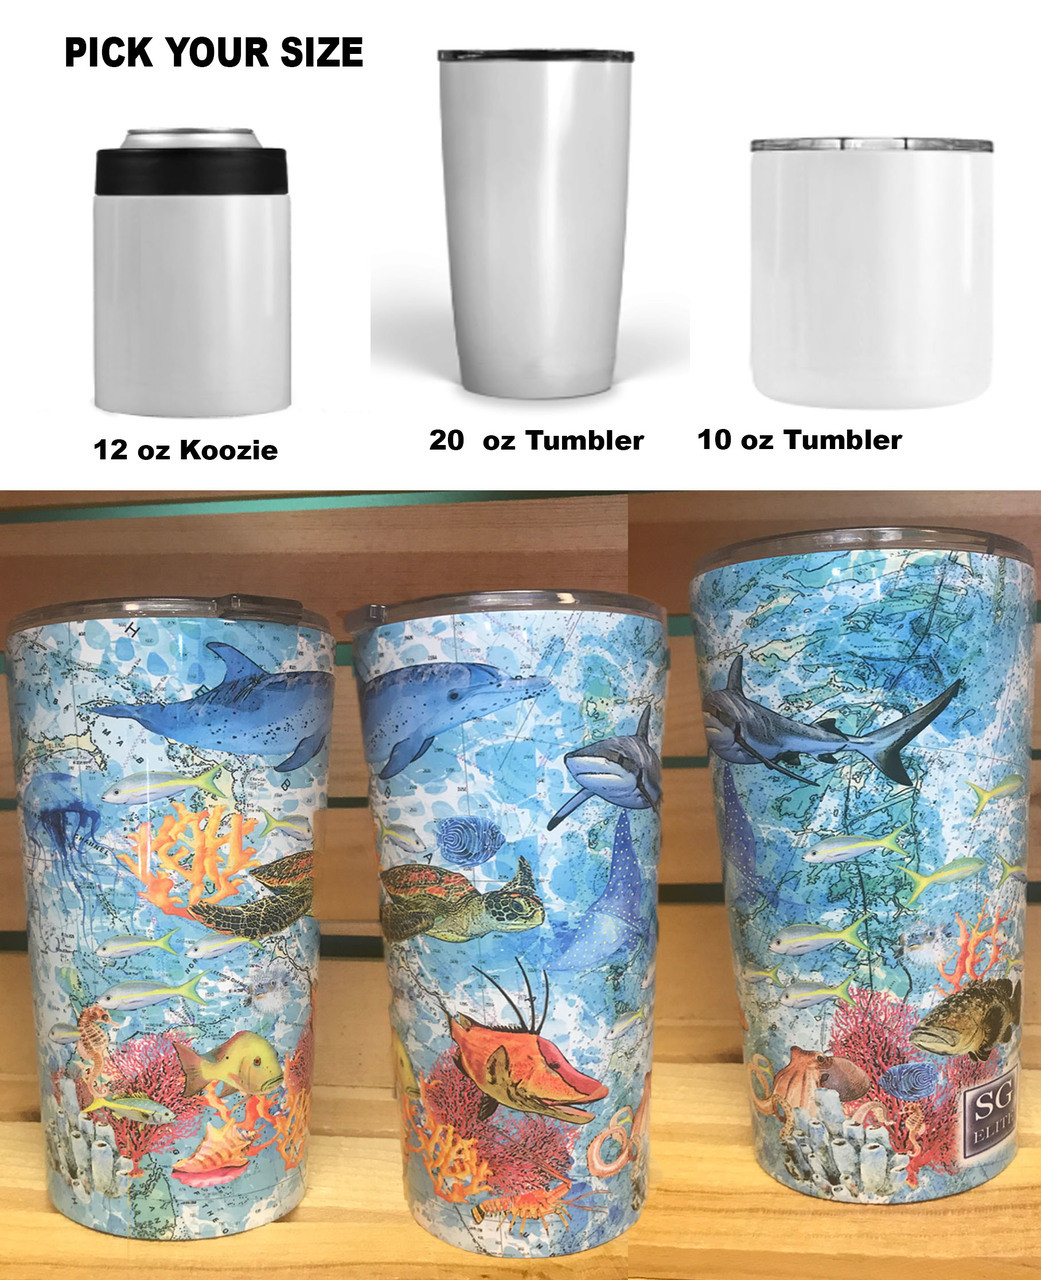 https://cdn10.bigcommerce.com/s-90gulf/products/2283/images/4379/SG_ELITE_reef_stainless_steel_tumblers___39830.1555825455.2280.2280.jpg?c=2